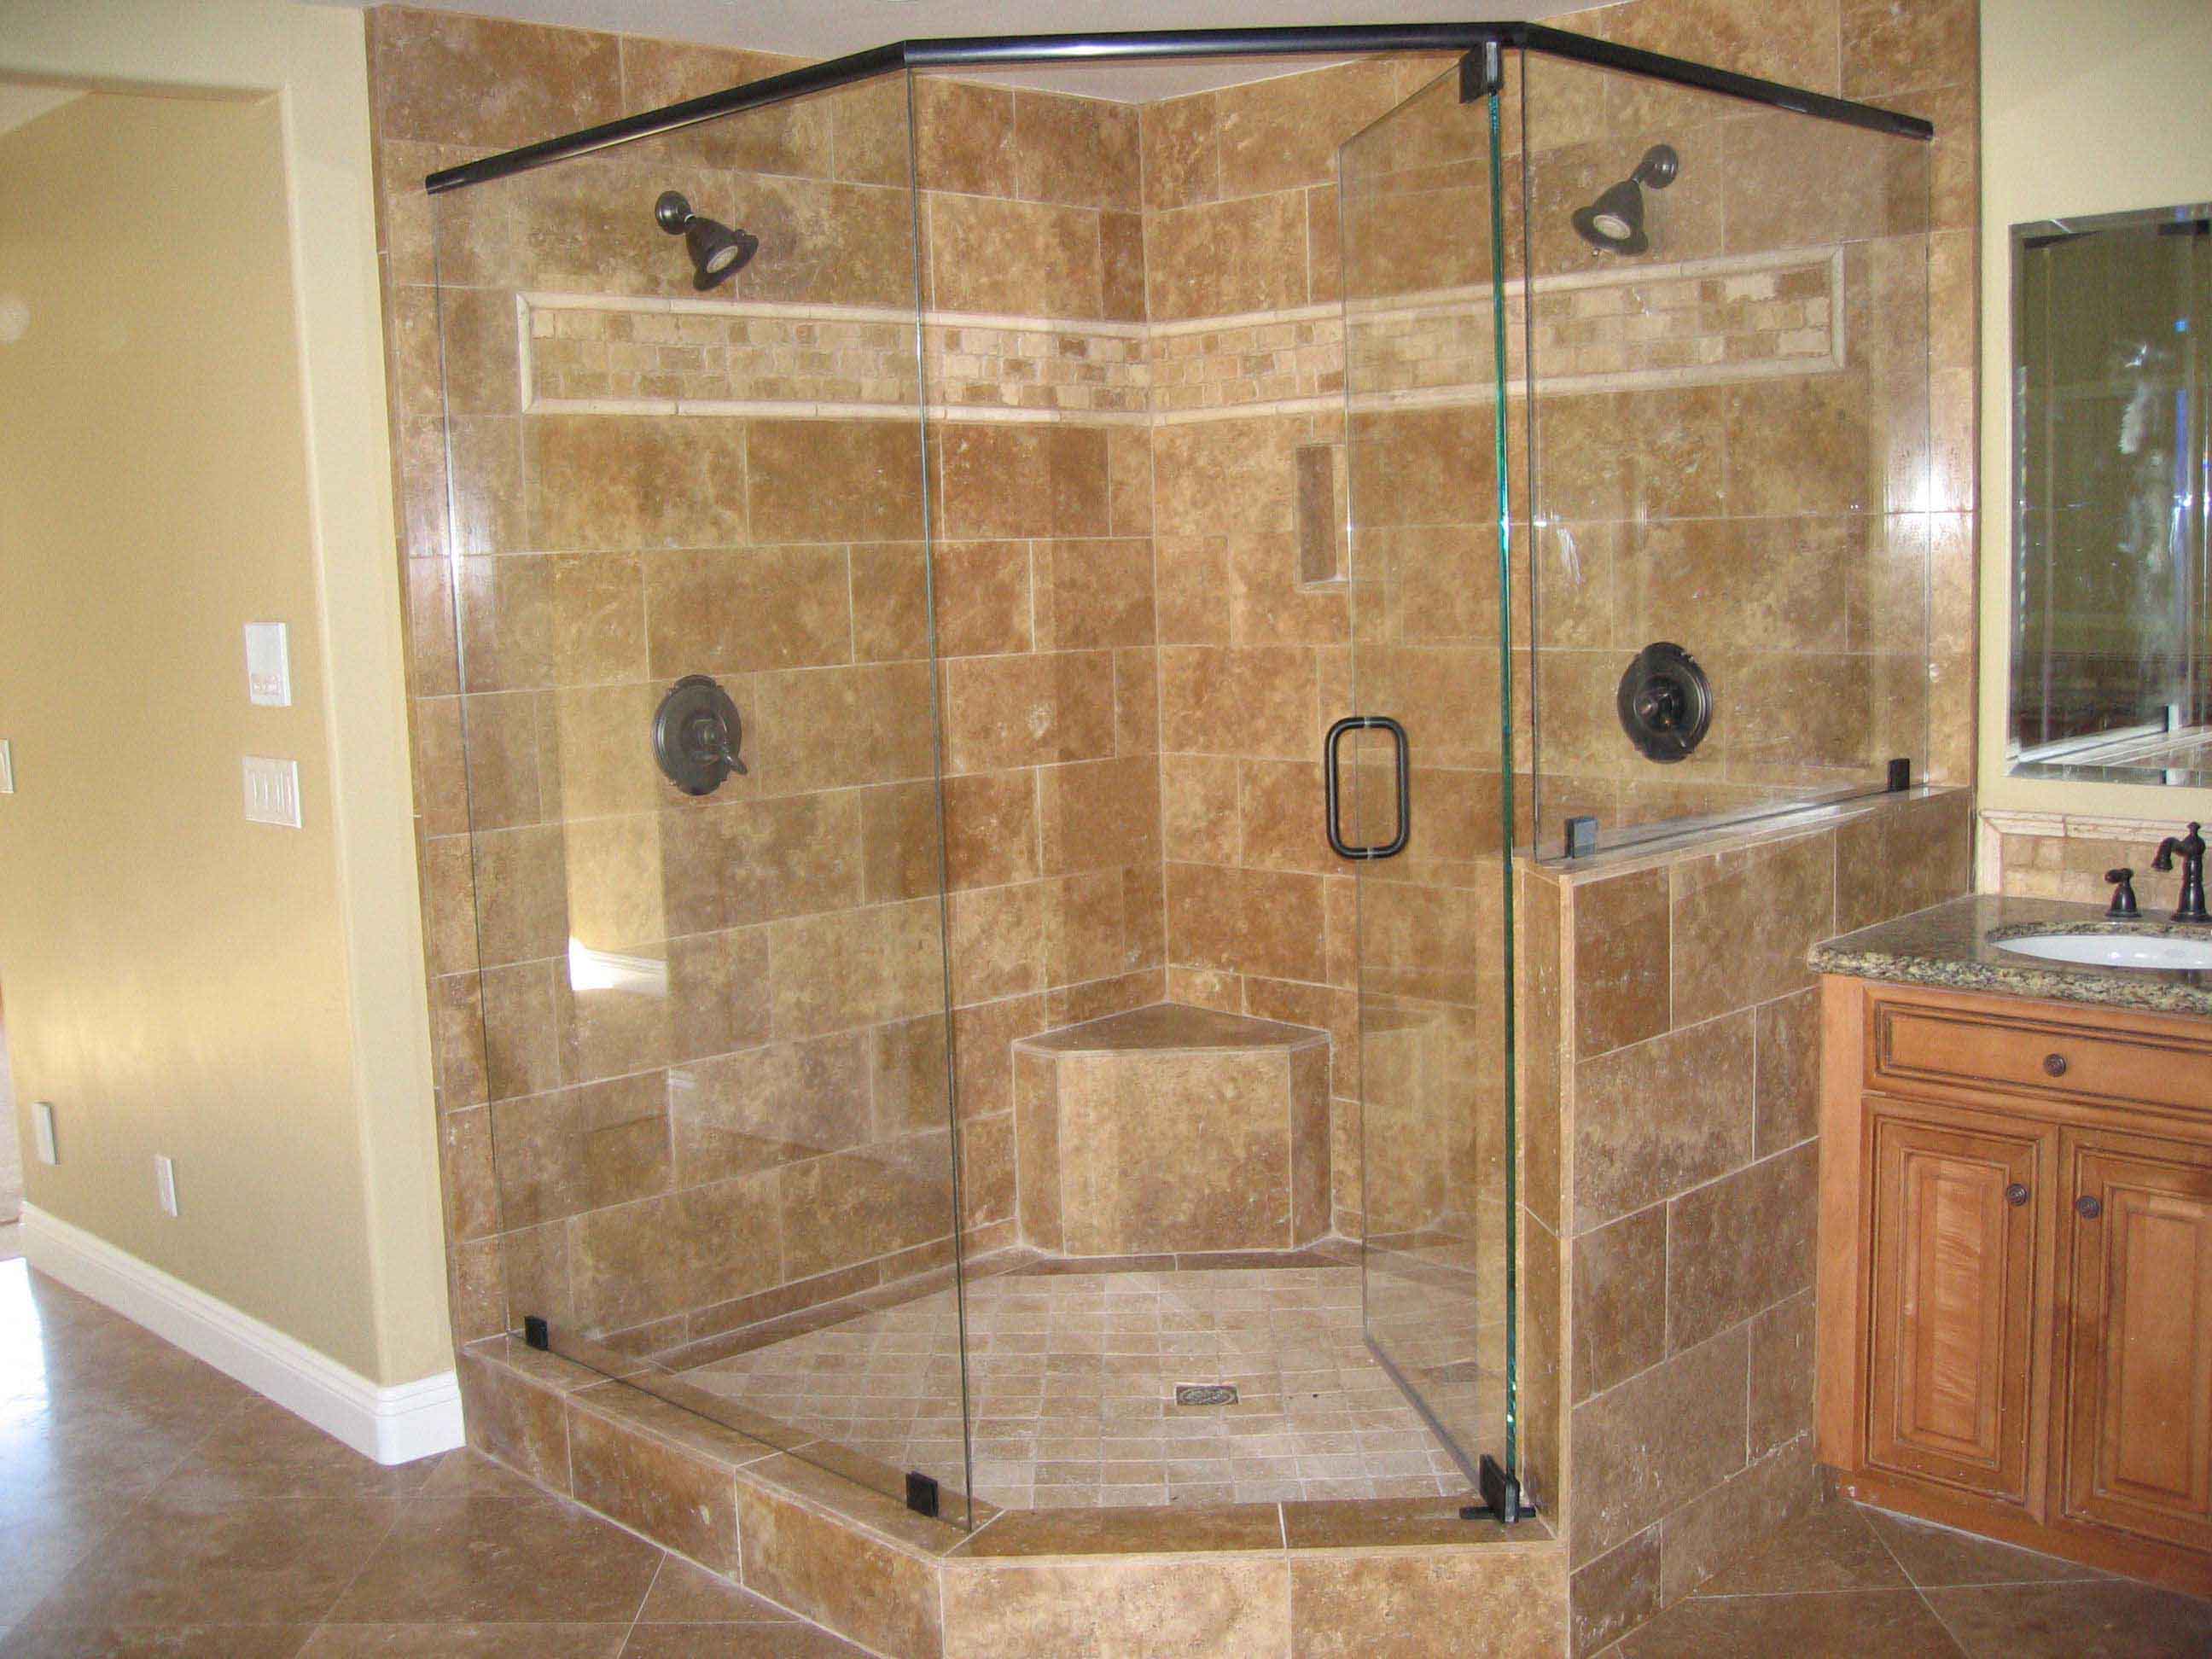 Shower Tile Installation Cost Guide And, Cost Of Tile Installation In Shower